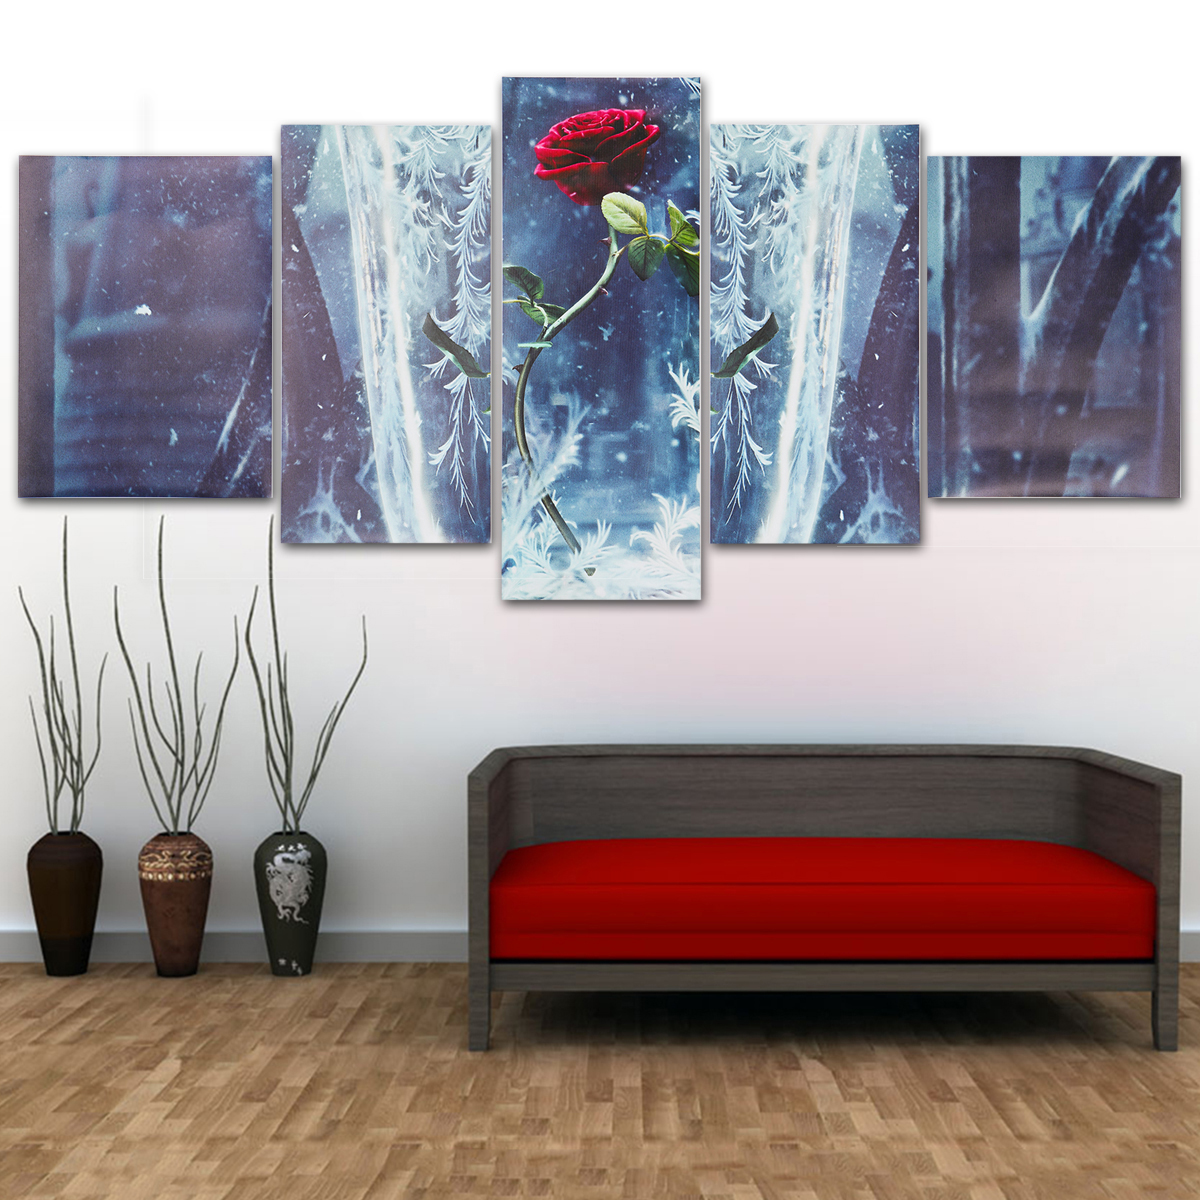 

5Pcs Set Rose Modern Canvas Print Paintings Wall Art Pictures Home Decor Unframed